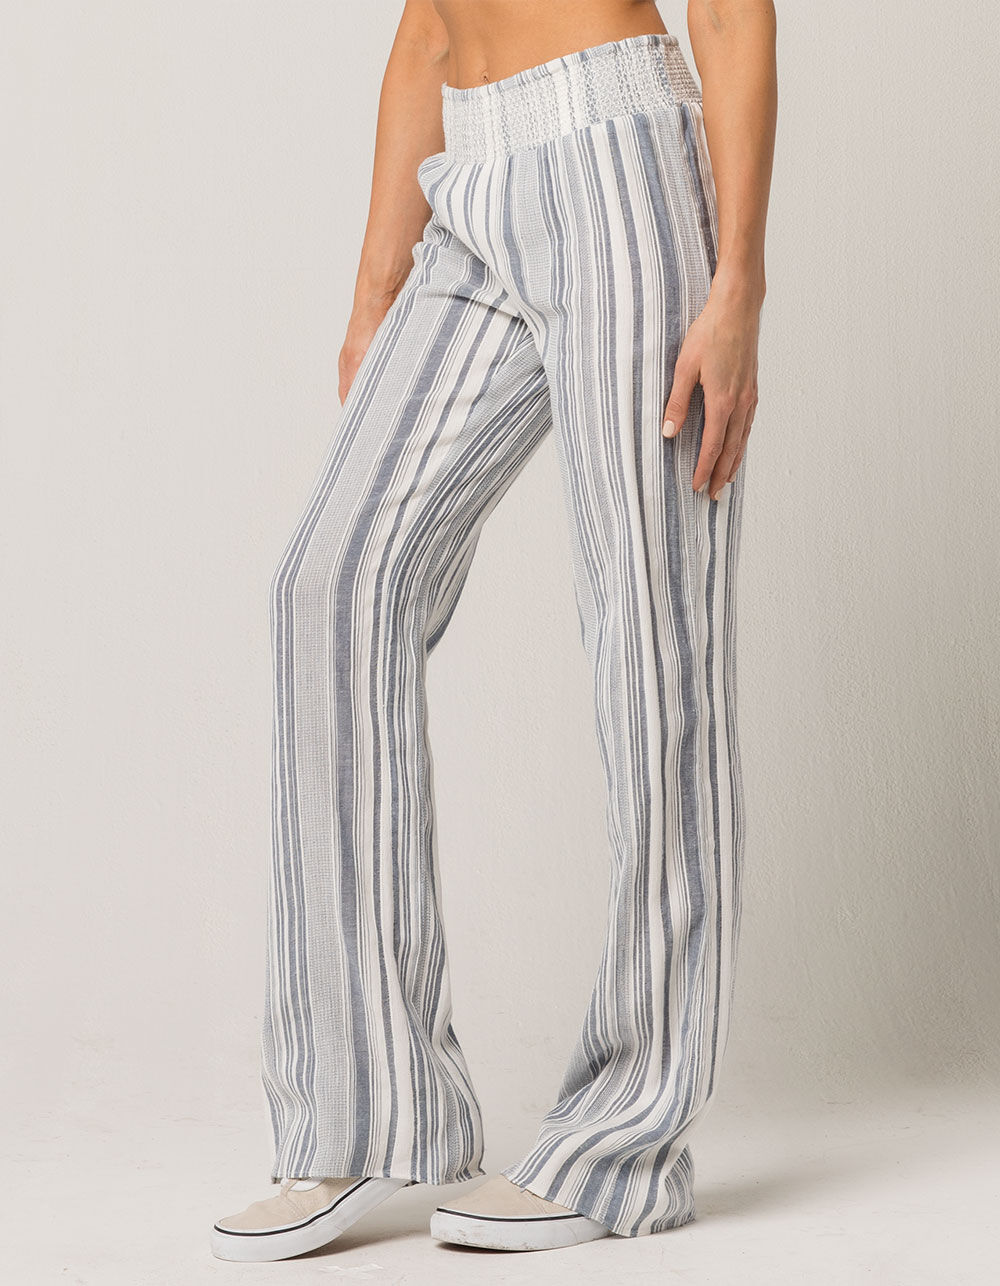 OTHERS FOLLOW Stripe Womens Pants image number 1